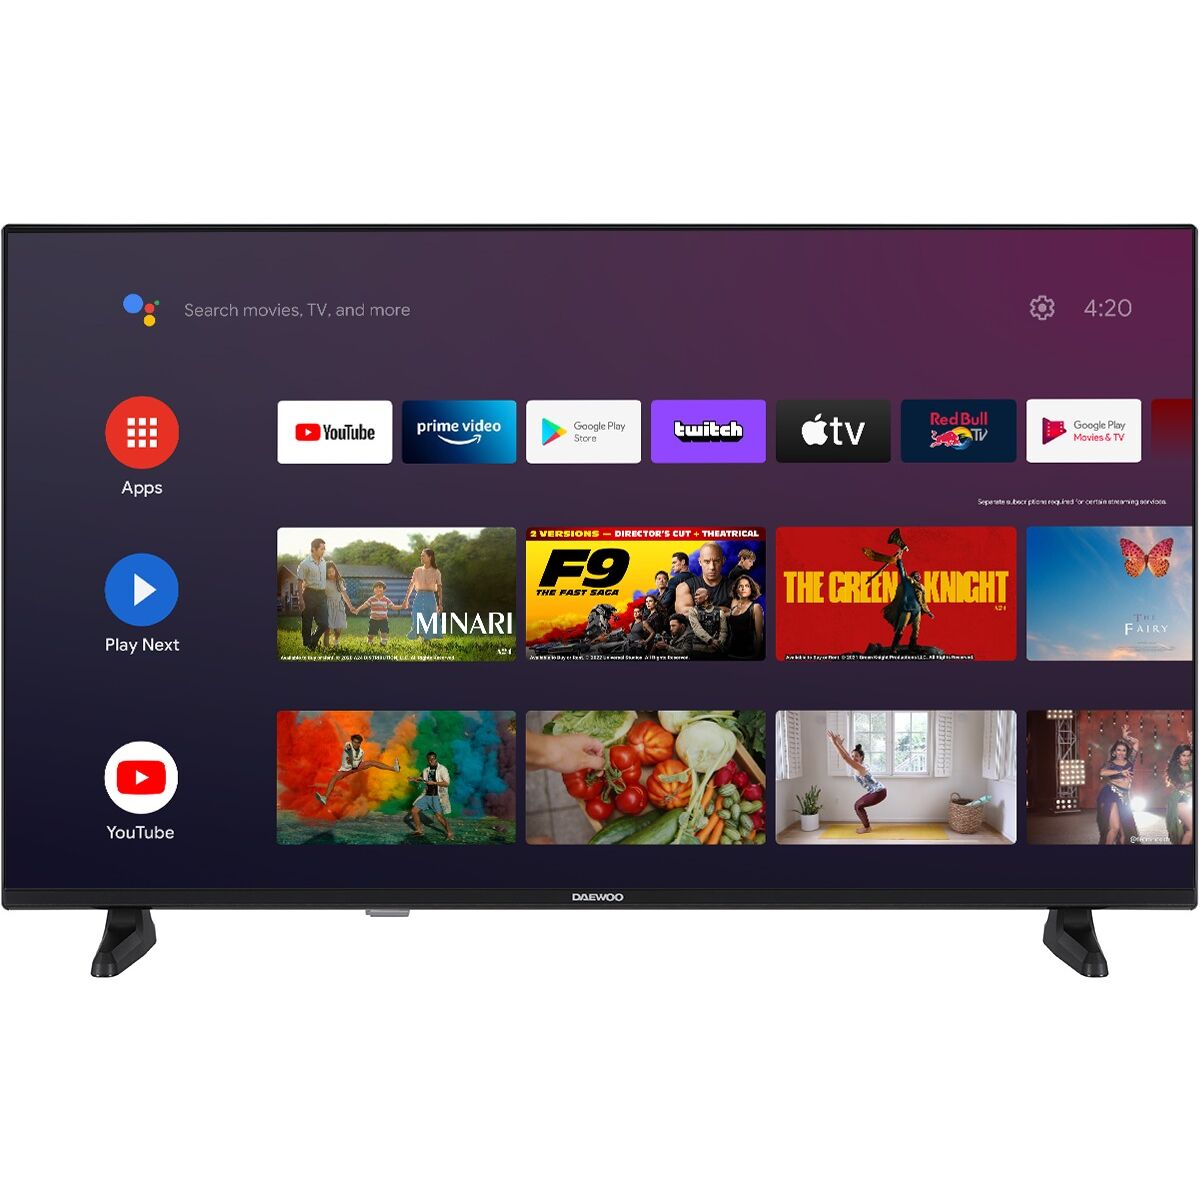 Smart TV Daewoo 40DM62FA Full HD 40" LED, Daewoo, Electronics, TV, Video and home cinema, smart-tv-daewoo-40dm62fa-full-hd-40-led, Brand_Daewoo, category-reference-2609, category-reference-2625, category-reference-2931, category-reference-t-18805, category-reference-t-18827, category-reference-t-19653, cinema and television, Condition_NEW, entertainment, Price_200 - 300, RiotNook